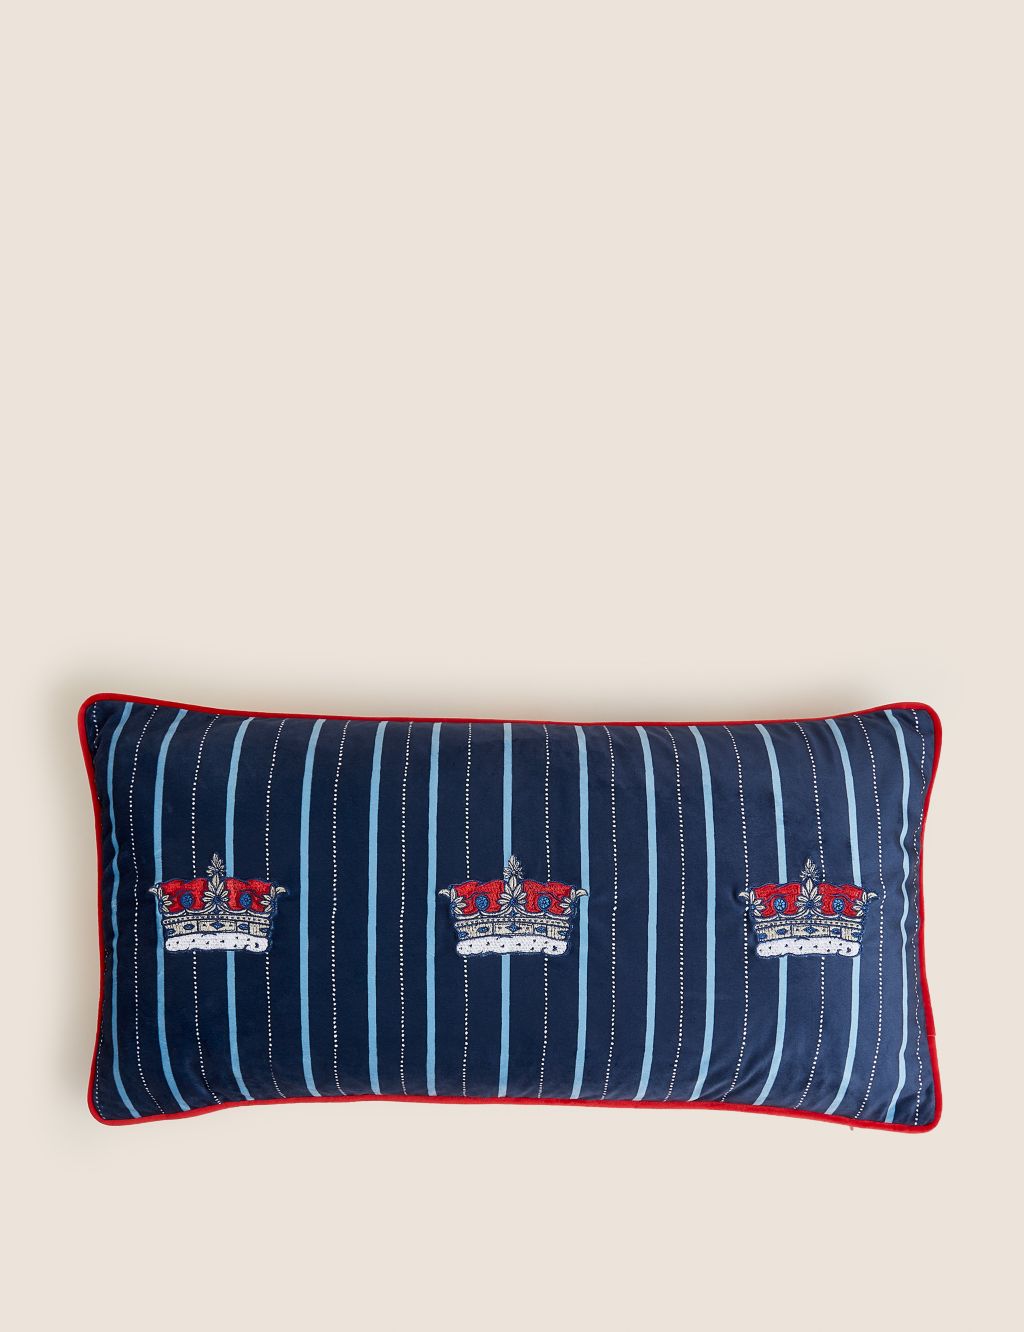 Crown Embroidered Bolster Cushion image 3